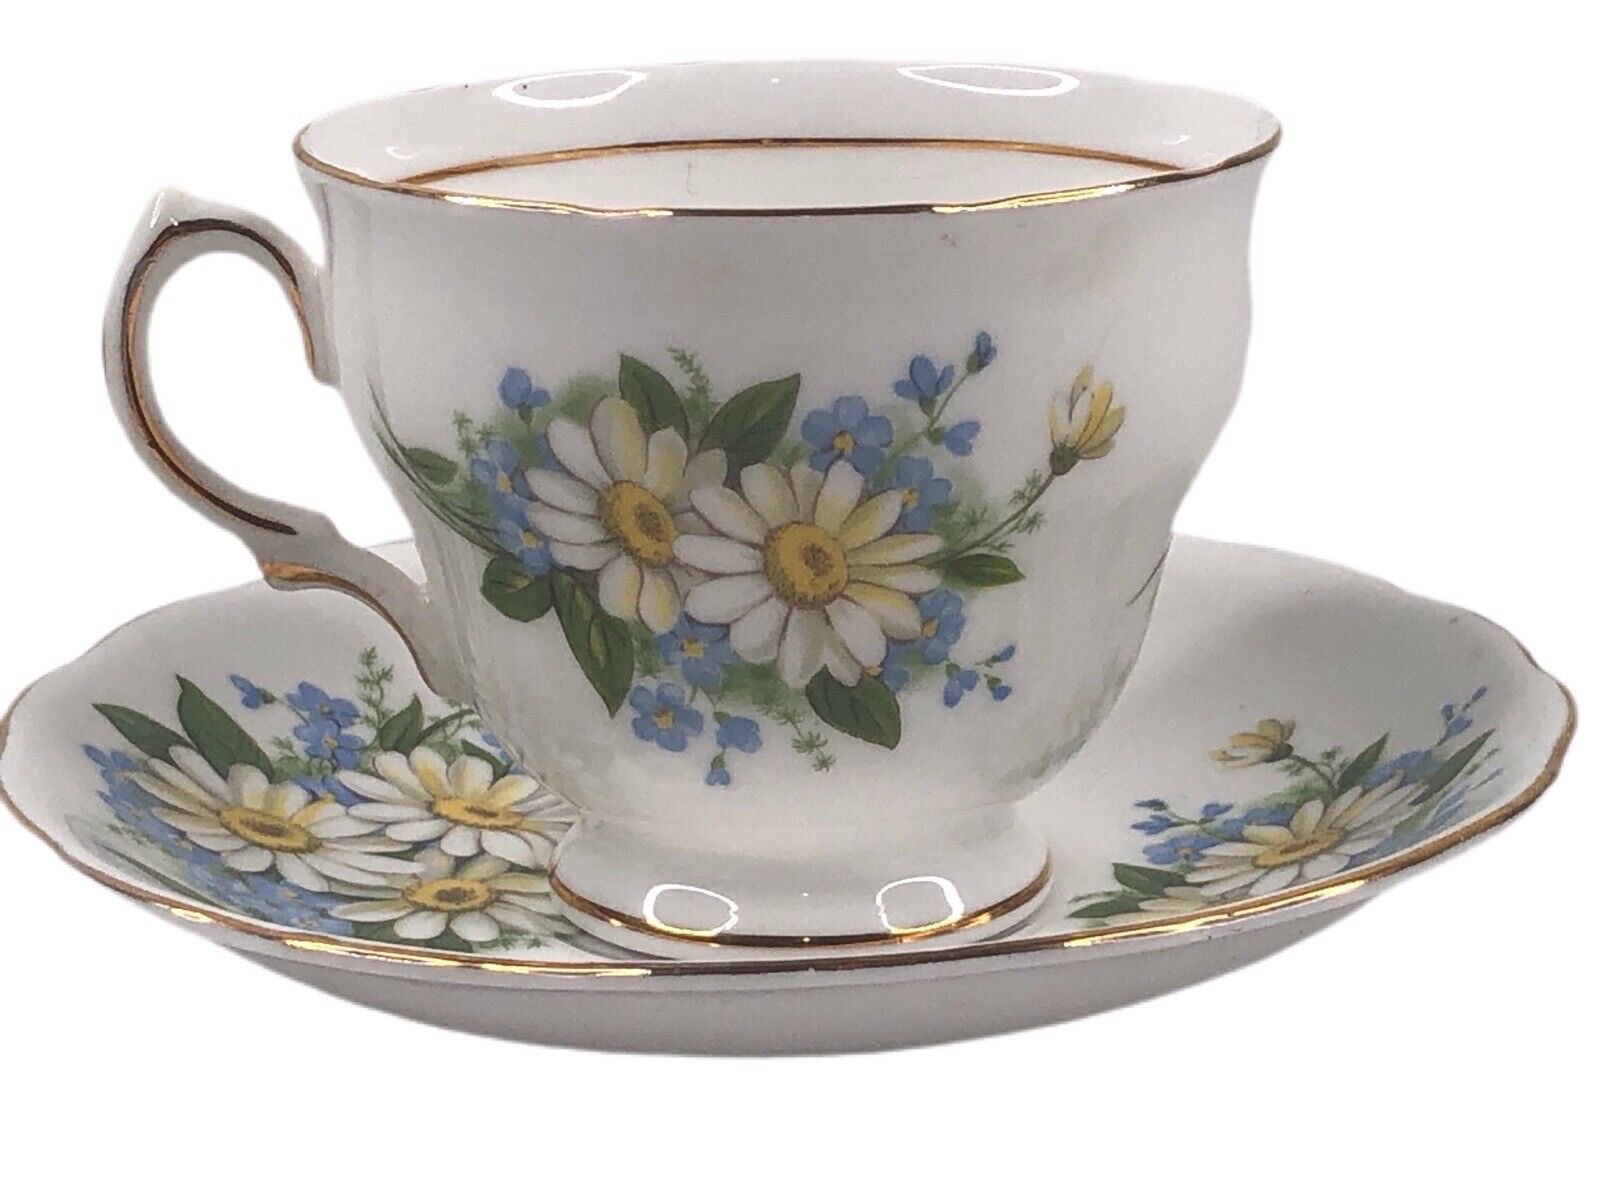 Colclough English Cup & Saucer White Daisy 22K Gold Trim Marked Footed 